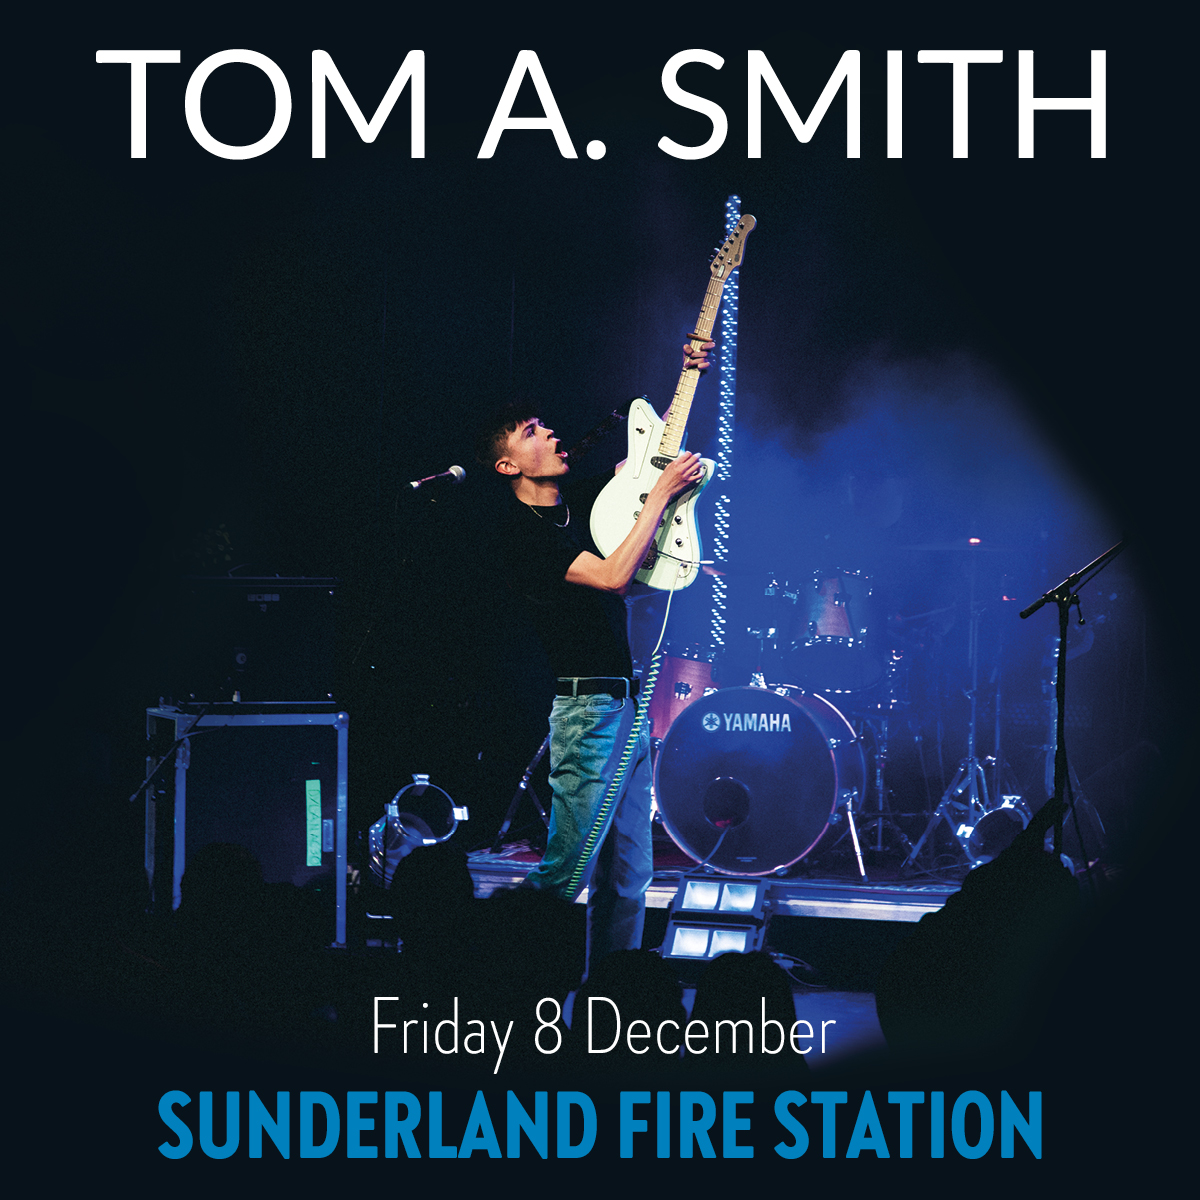 NOW ON SALE Super excited to have the rising star and hometown boy that is @tomasmithmusic back at The Fire Station later this year to close his Autumn/Winter tour! Tom A Smith - Friday 8 December - Book now 👉 bit.ly/3pFYoAZ